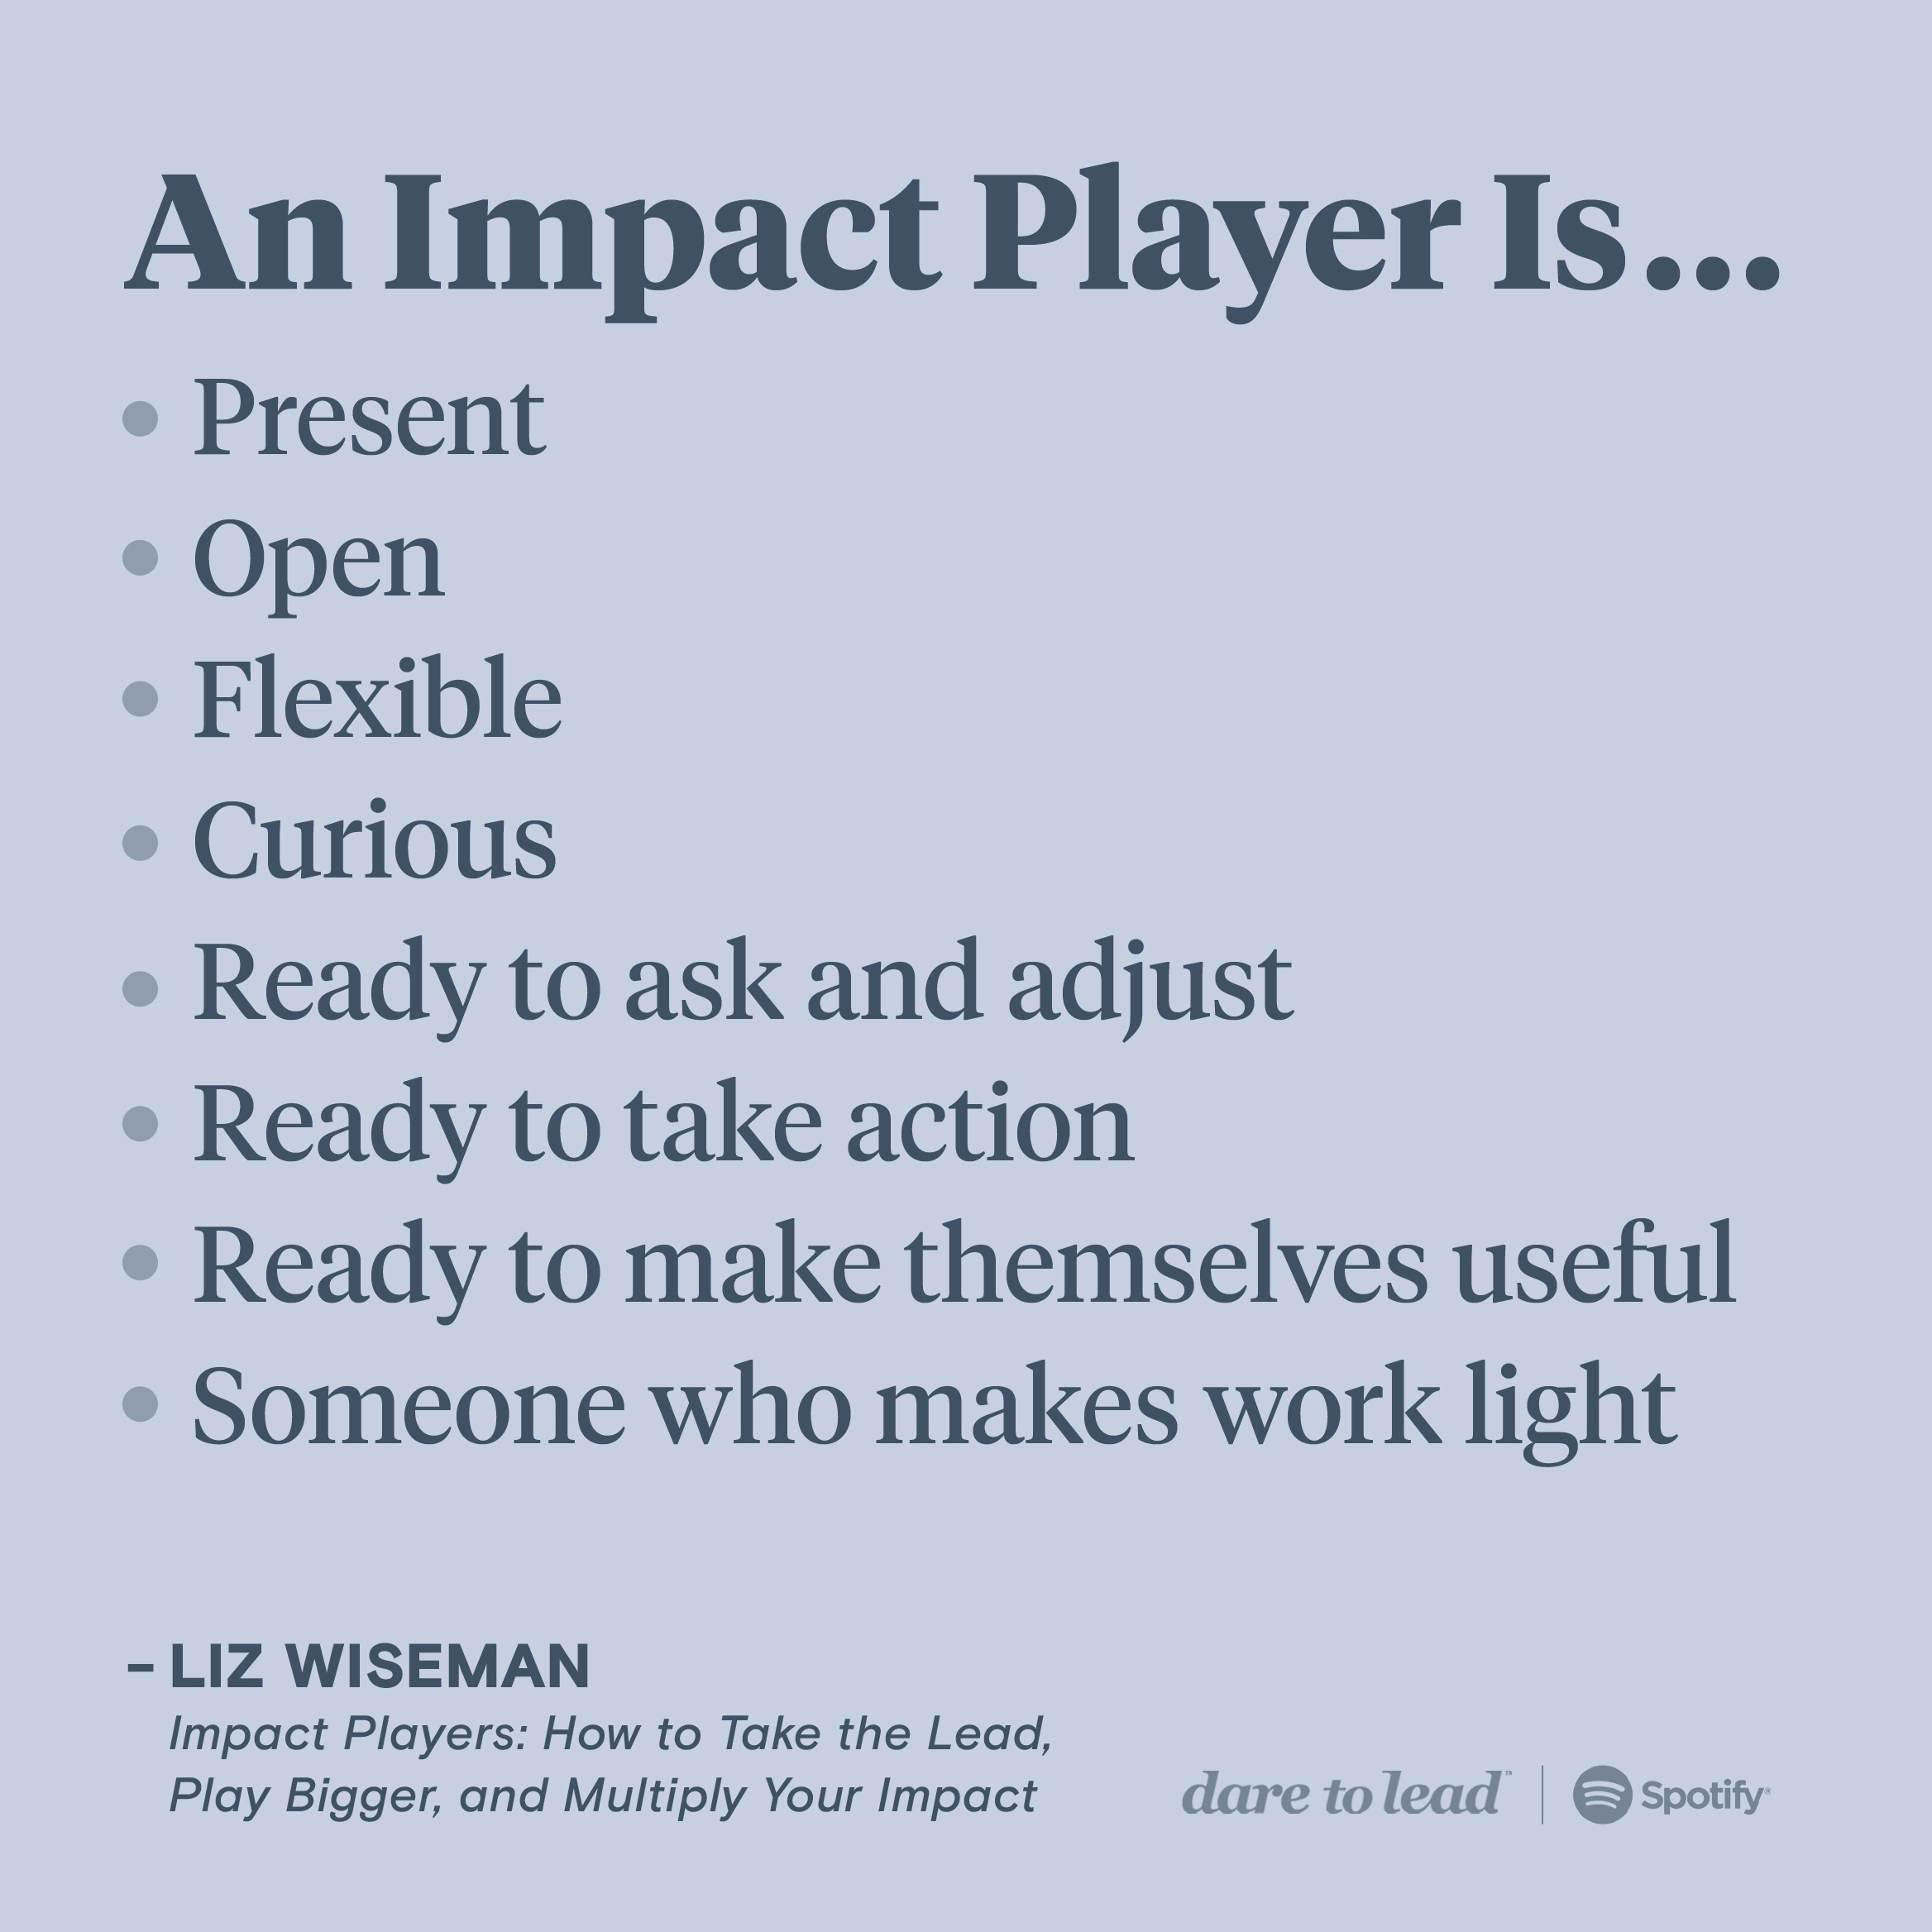 According to Liz Wiseman and her book Impact Players, an impact player is someone who is present, open, flexible, curious, ready to ask and adjust, ready to take action, ready to make themselves useful, and someone who makes work light.